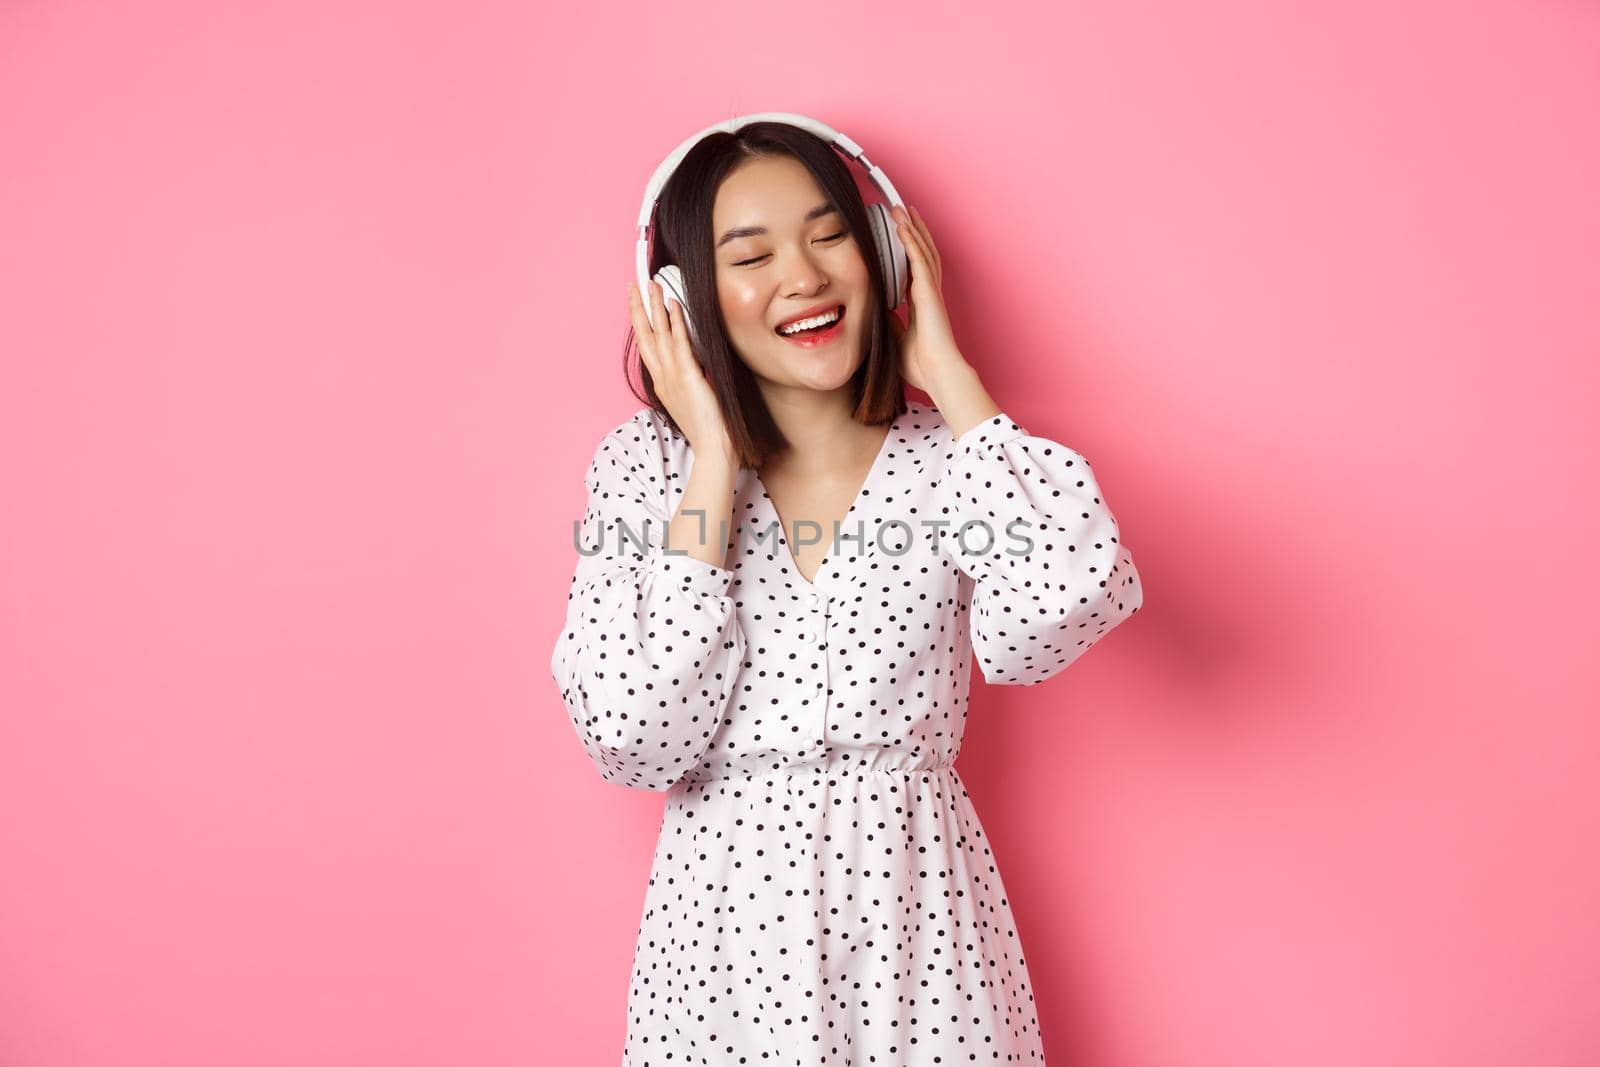 Romantic asian woman smiling happy, listening music in headphones and dancing, standing in trendy dress over pink background.